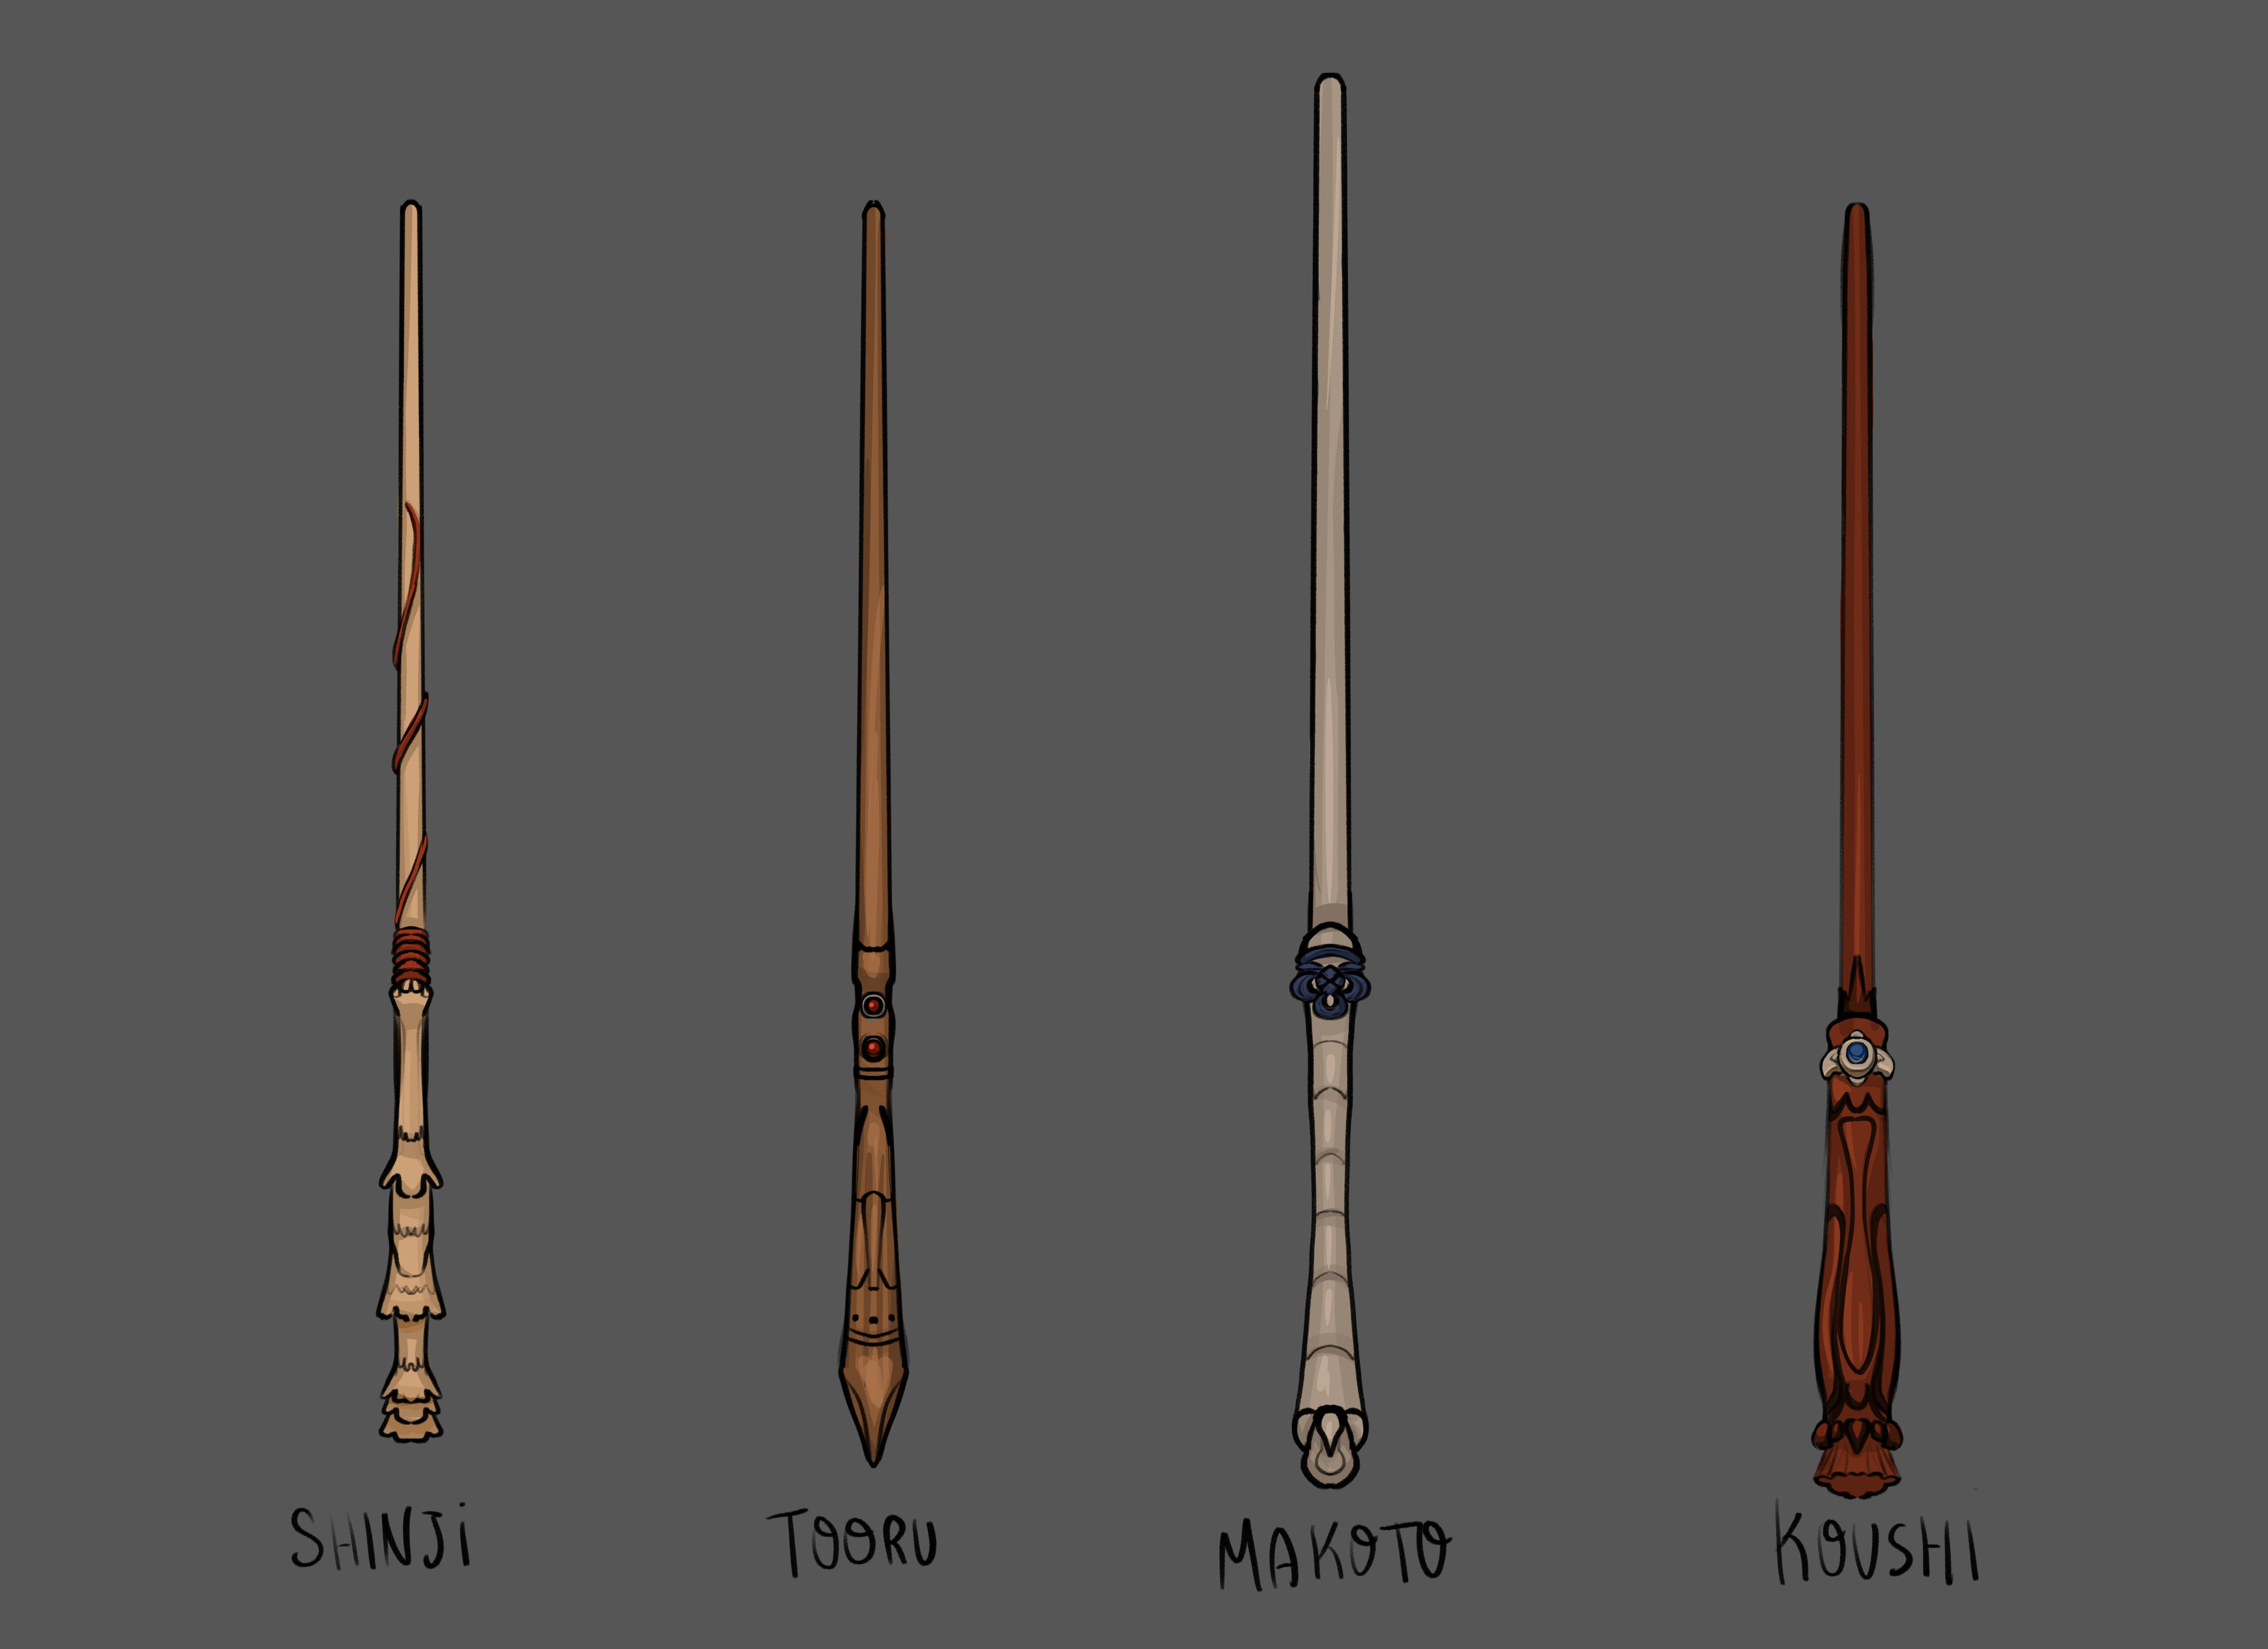 Inspired by Japanese Magic, the wands (a fairly new thing in their magic society) had to have special objects linked to the wizard who owns the wand. So basically you can’t just buy any wand, it has to be made for you.